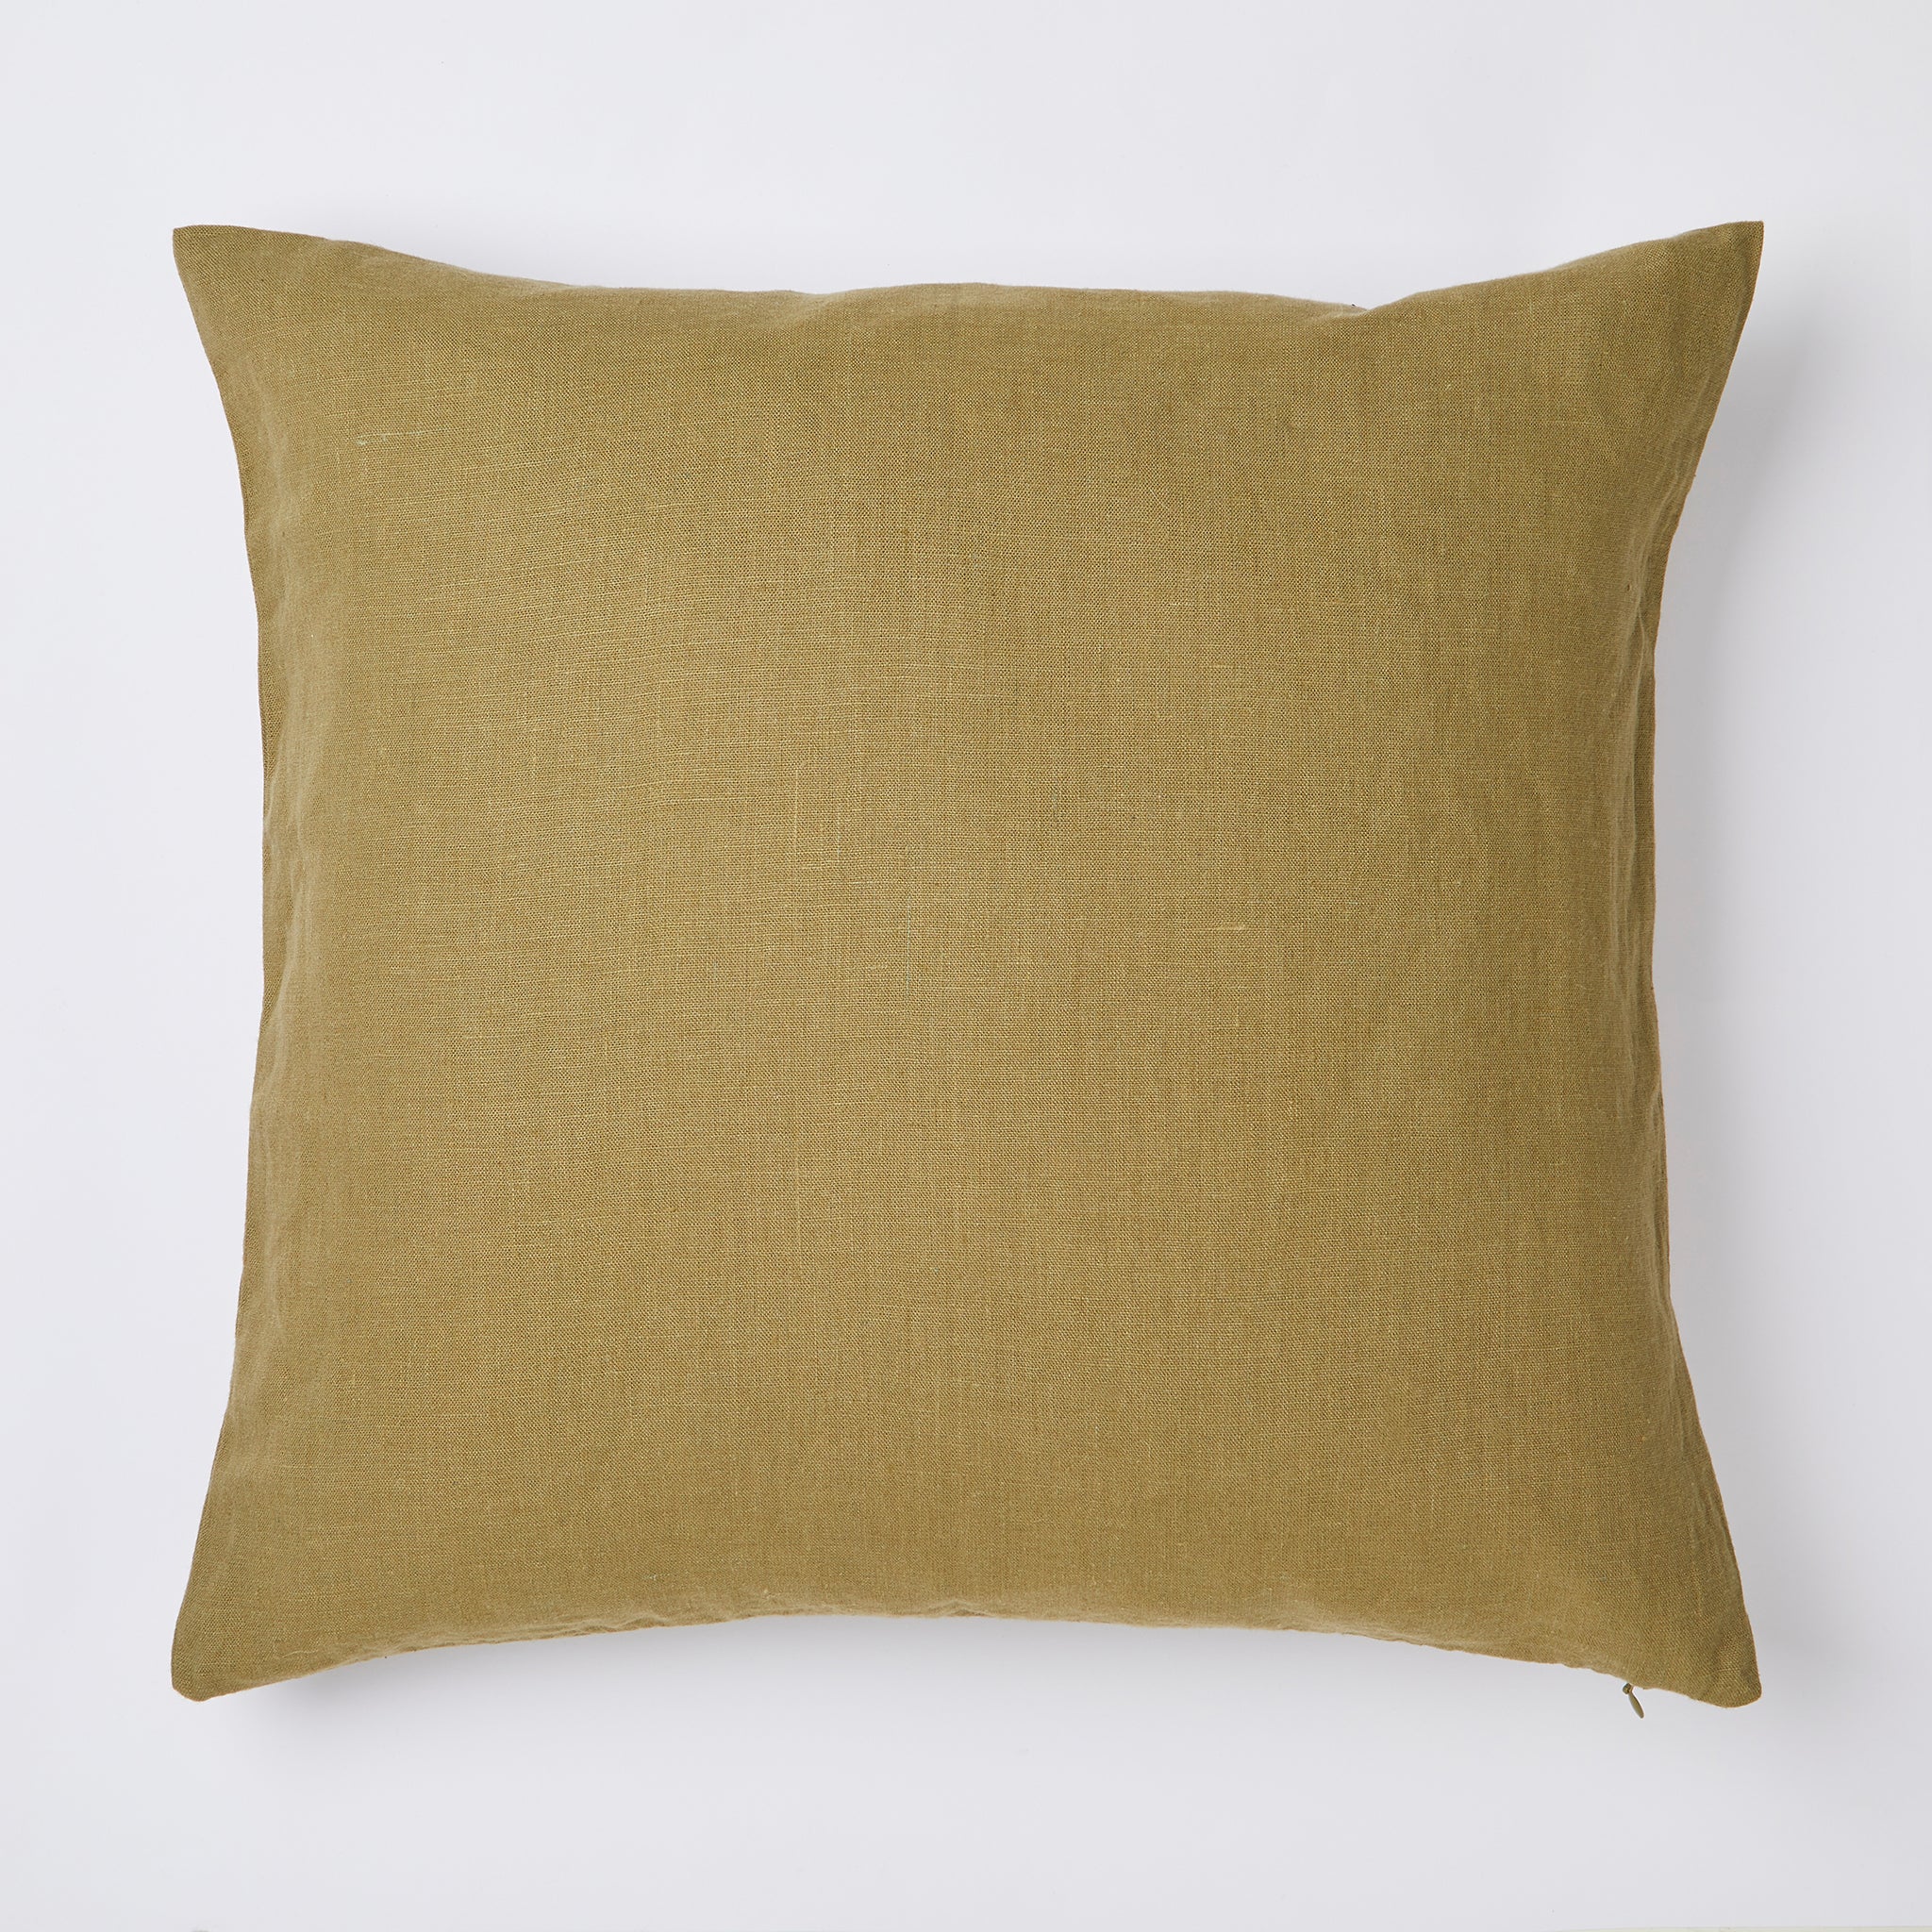 Stonewashed linen pillow, color Olive - By Native